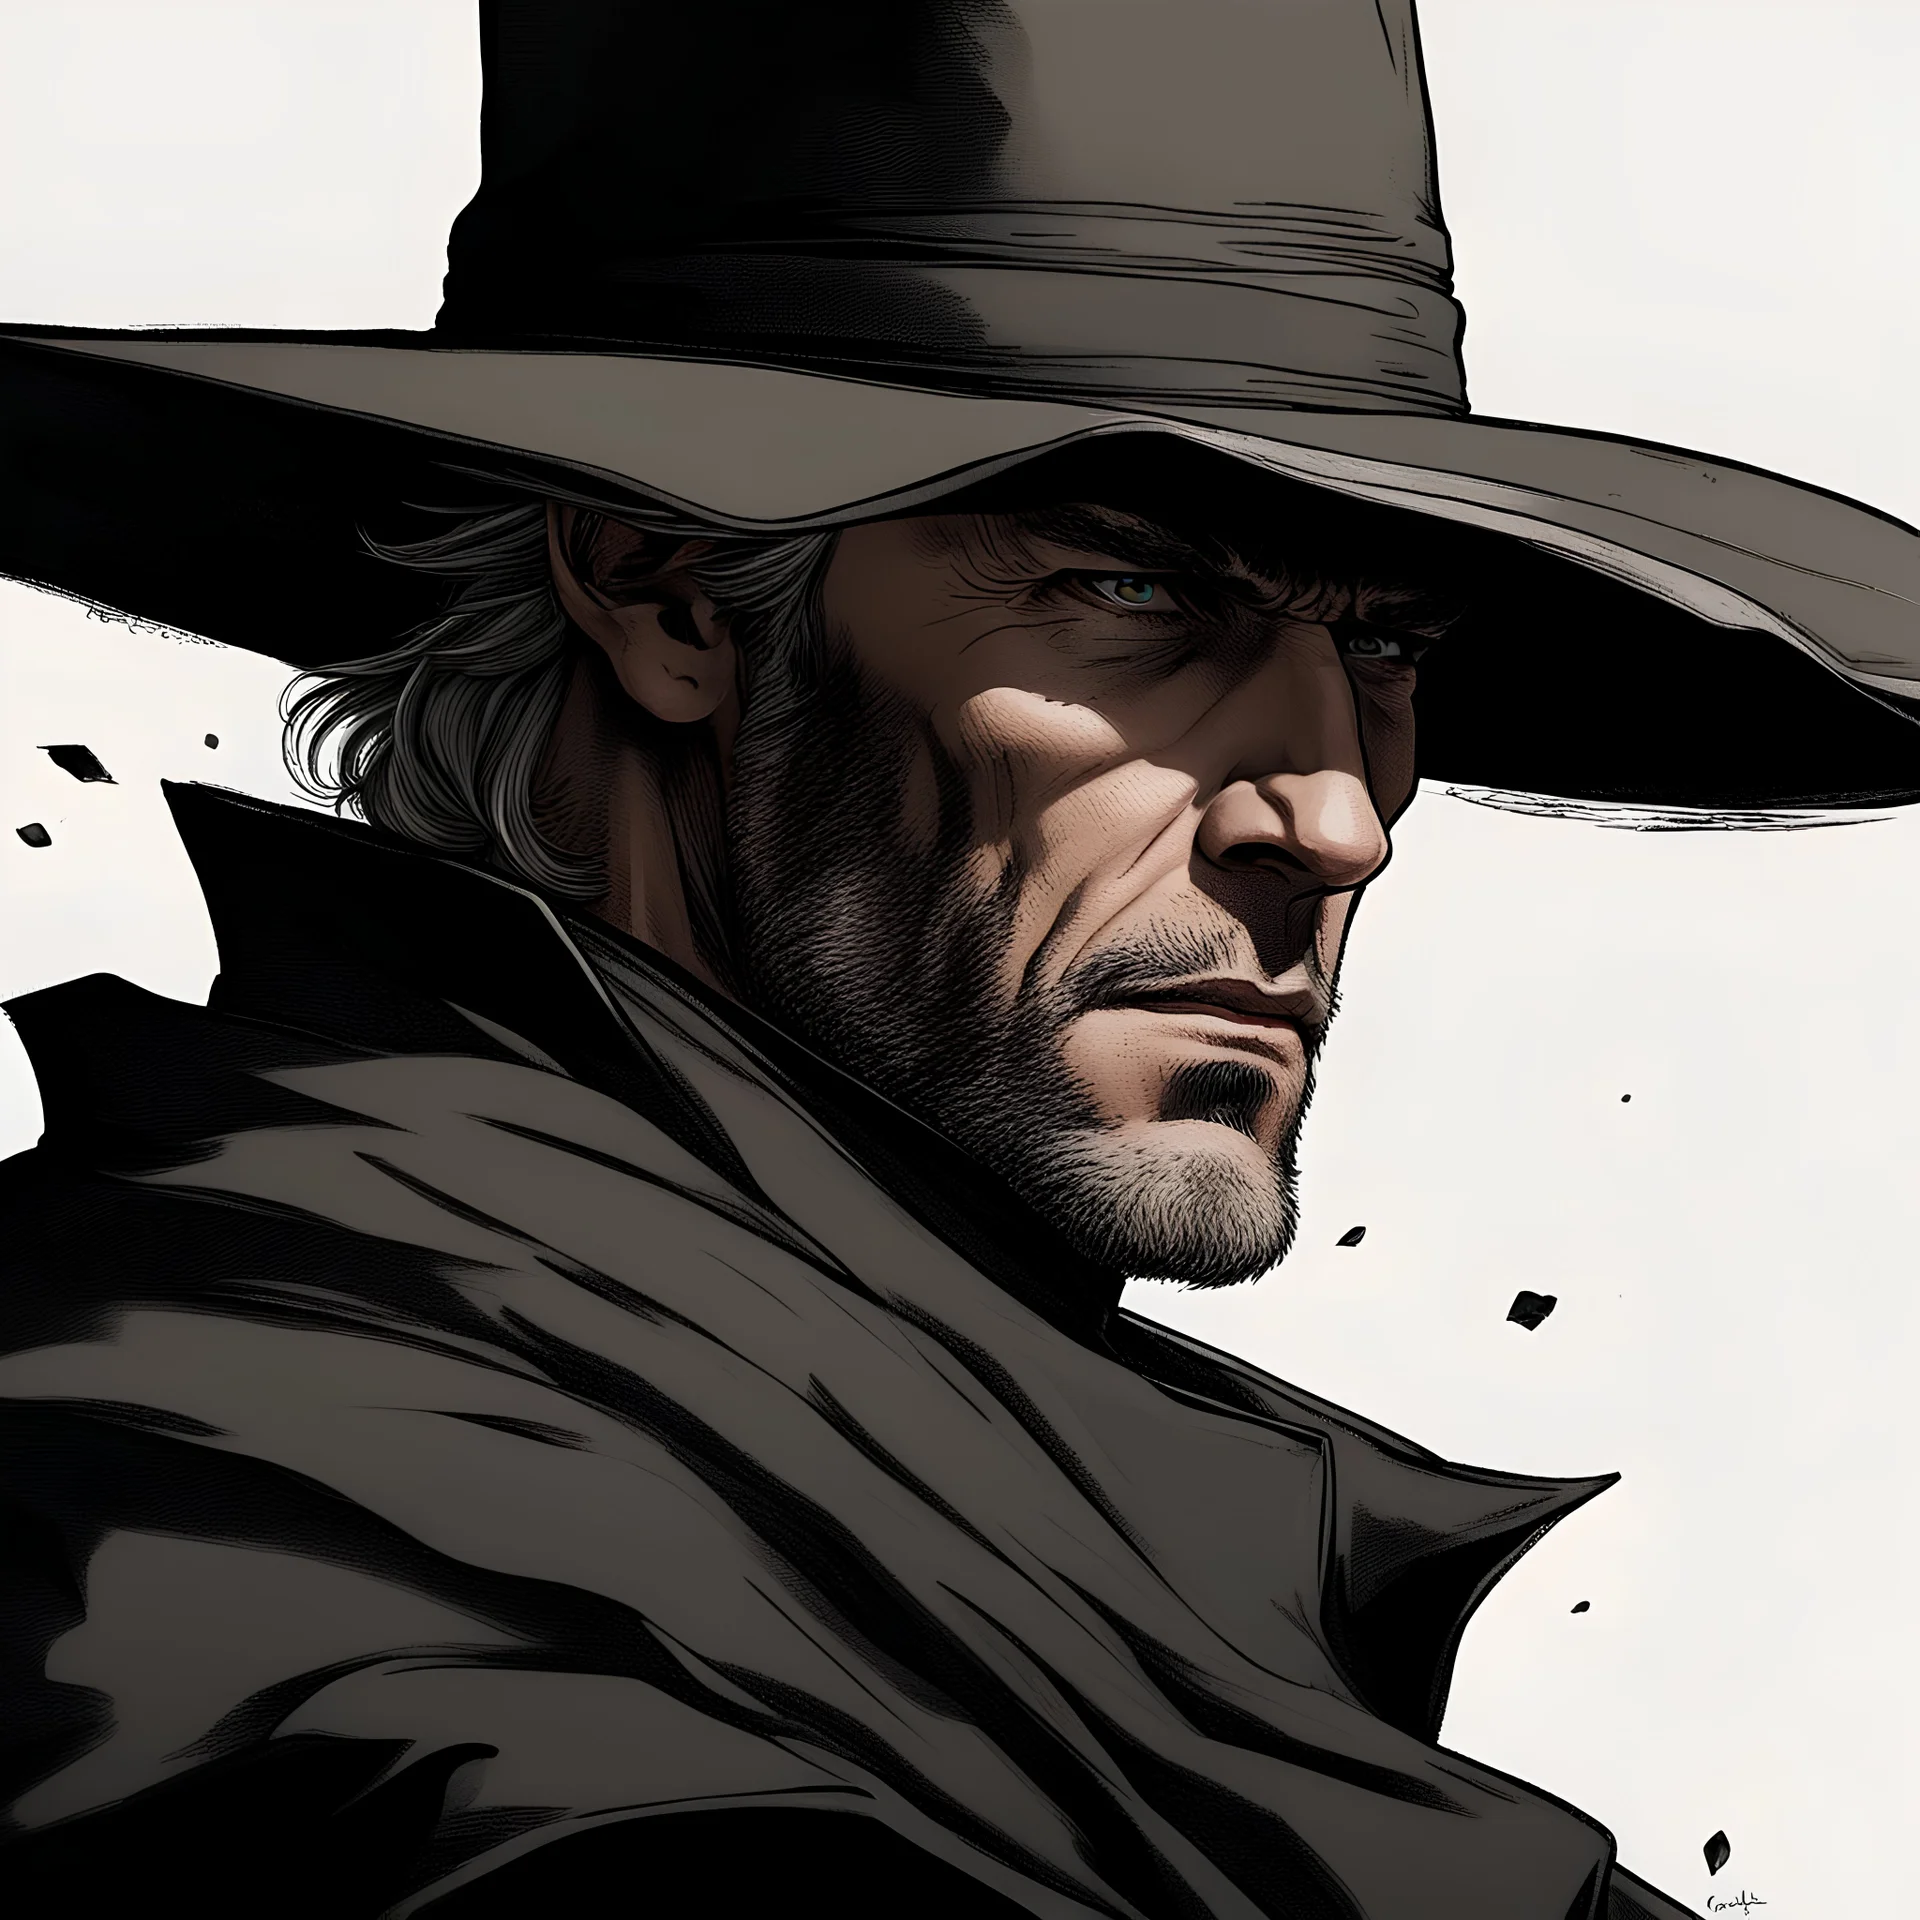 Western fantasy character realistic grimdark wearing a black cloak and looking similar to a younger Clint Eastwood